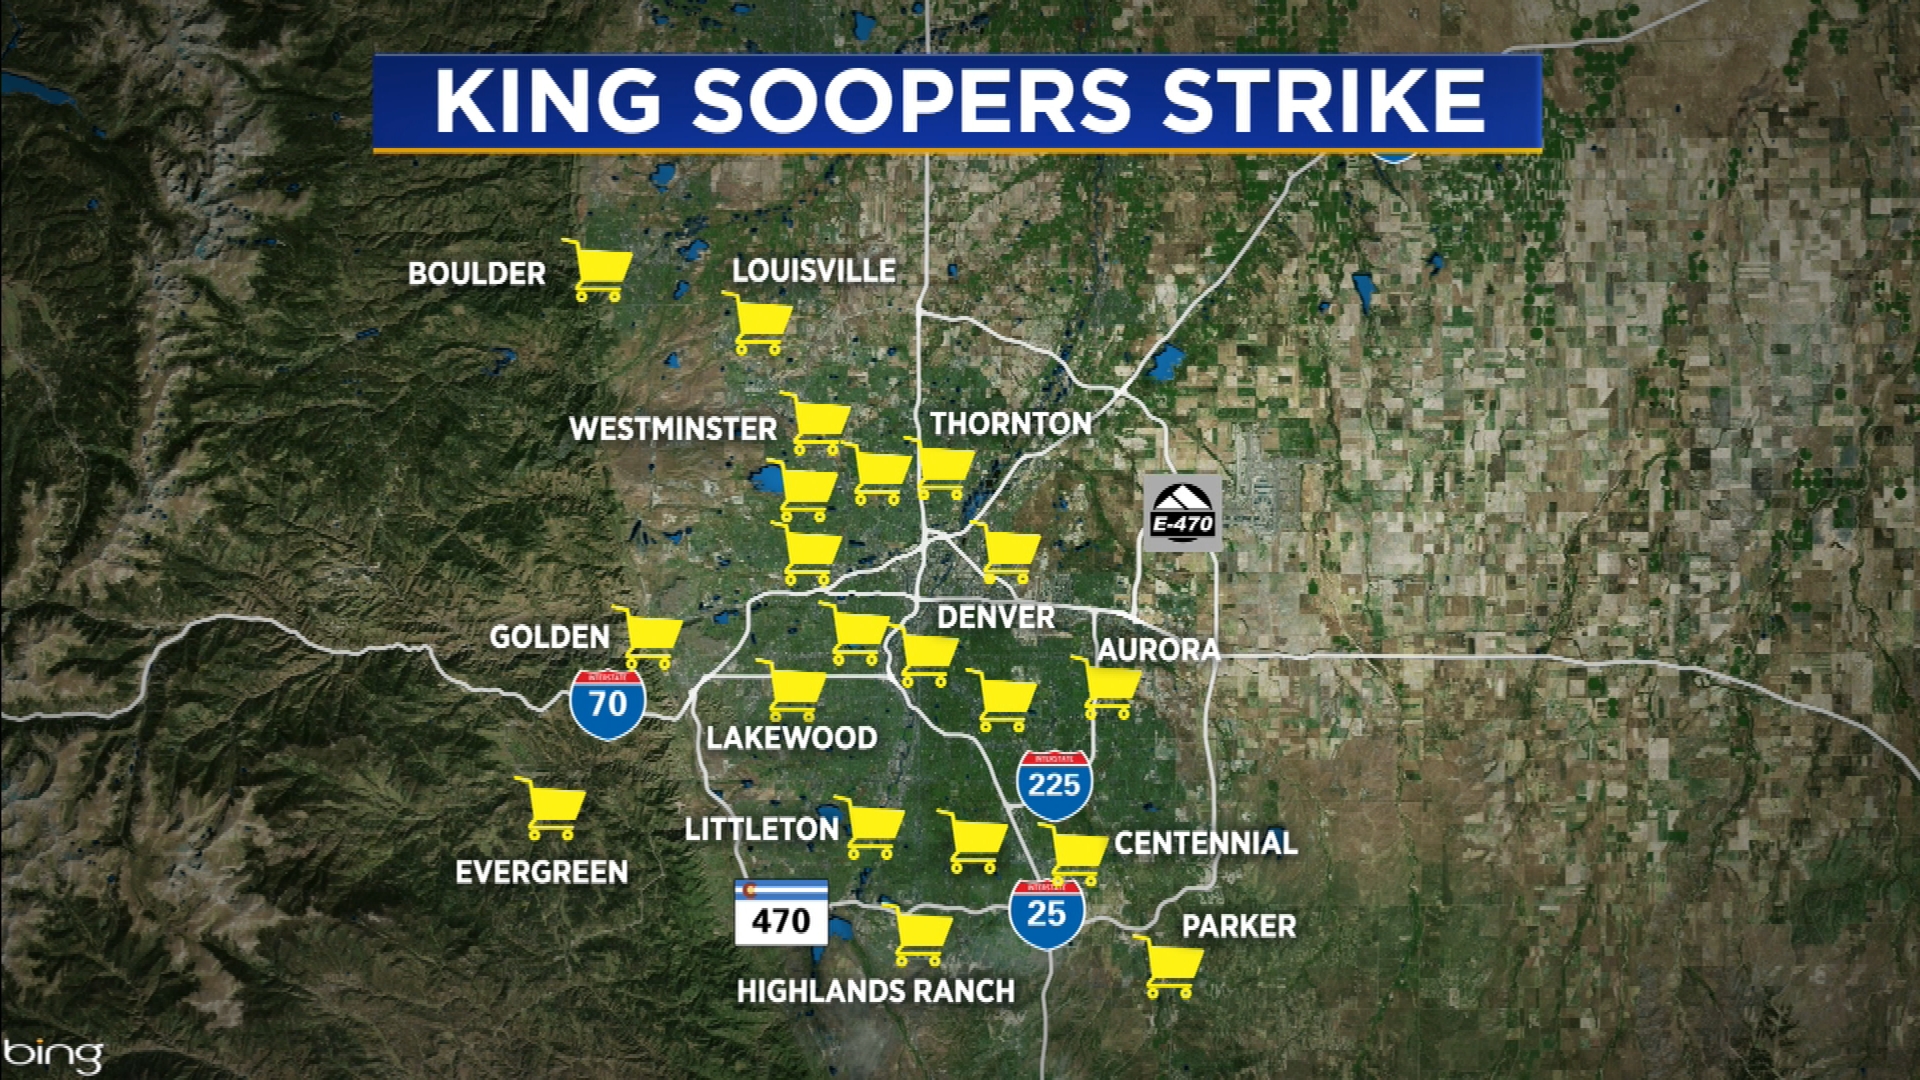 King Sopers Strike Begins, Union Says Grocery Stores Have 'Unfair Labor Practices'